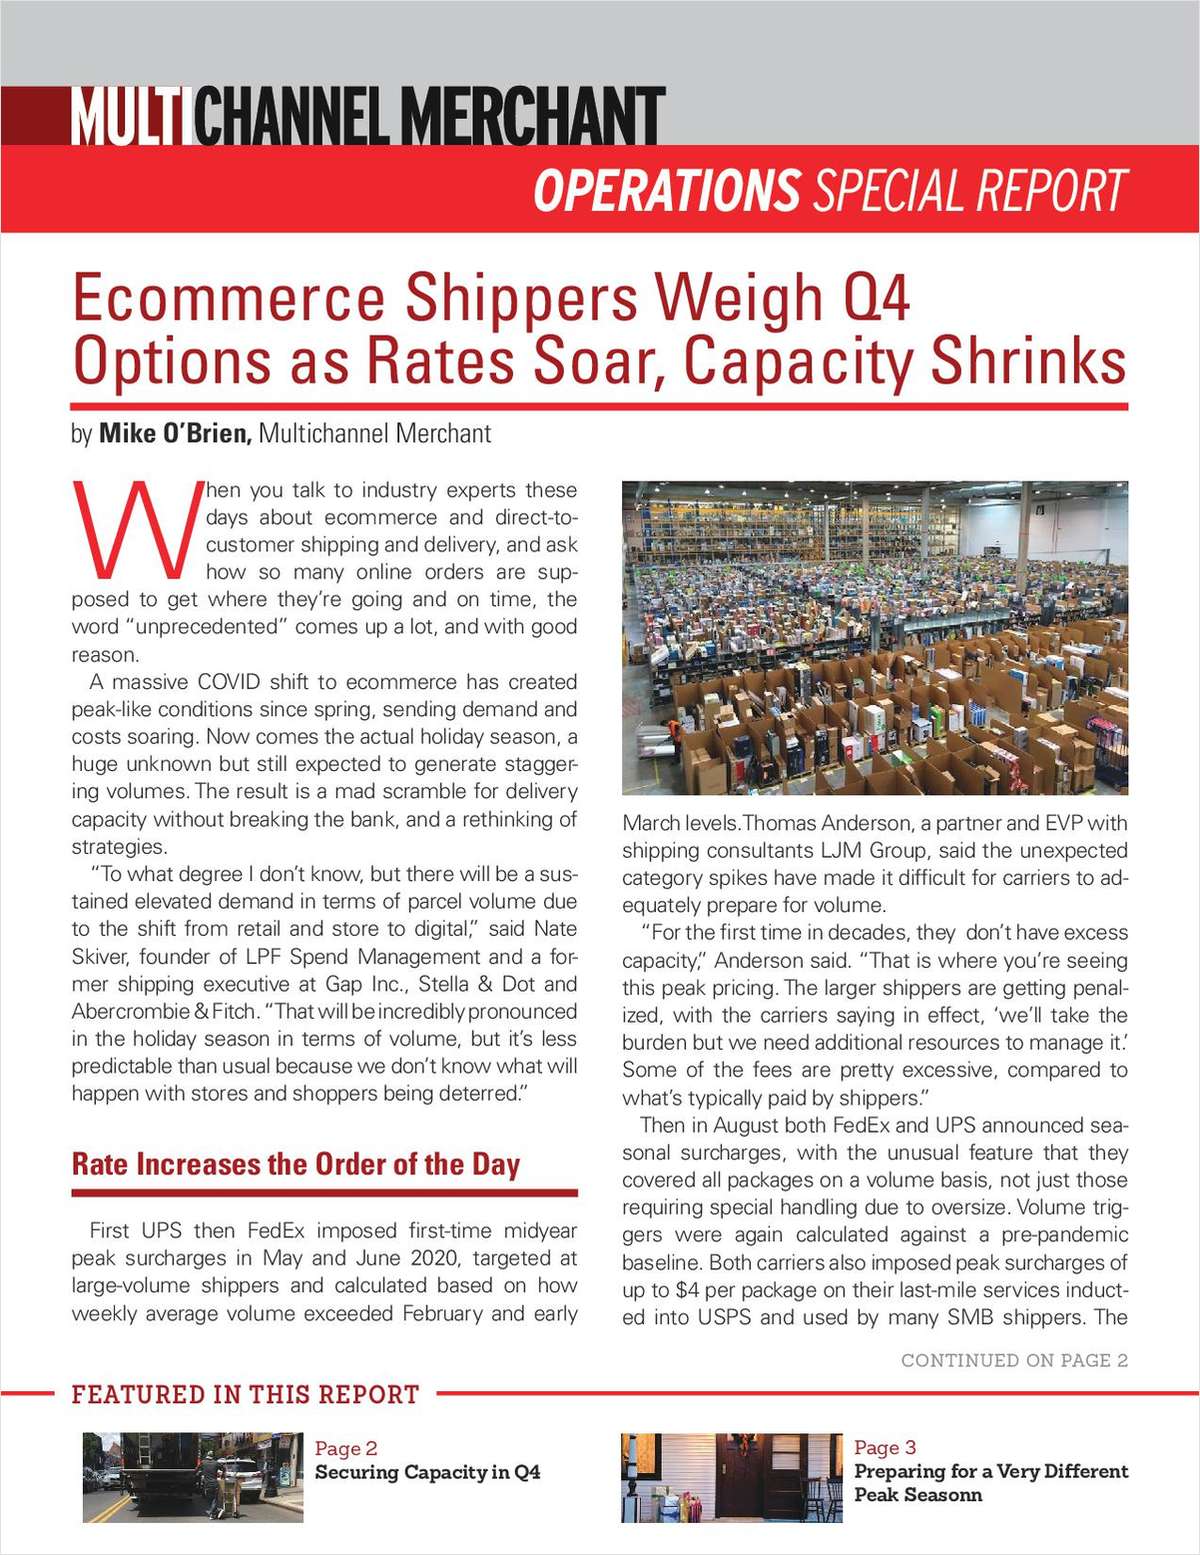 Ecommerce Shipping Outlook: Q4 and the Scramble for Capacity